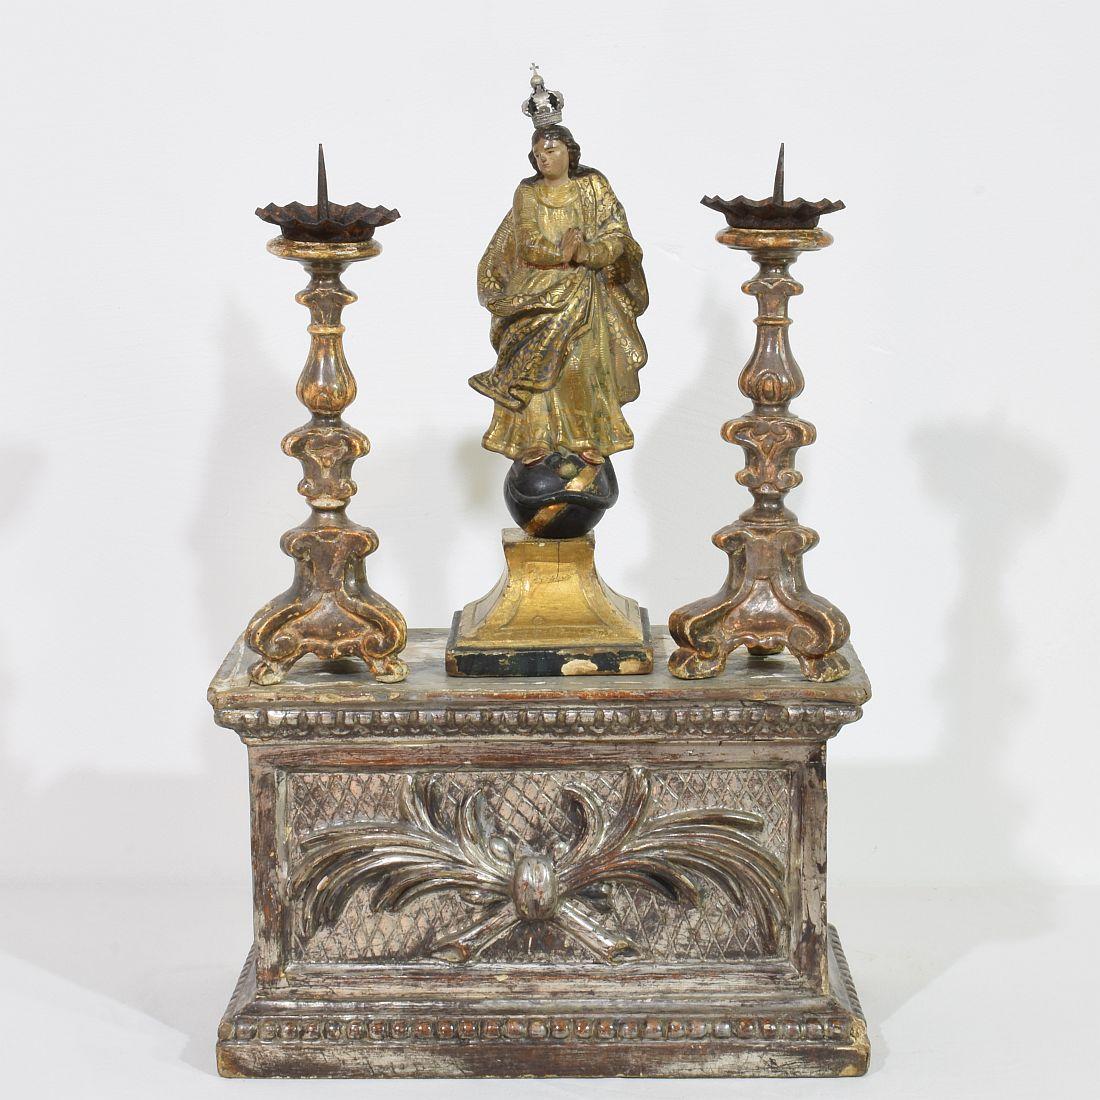 Beautiful weathered Neoclassical pedestal with its original silver-leaf gilding.
Great to use as a display for a small collection or just with some candles.
Italy, circa 1780. Weathered,small losses and old repairs